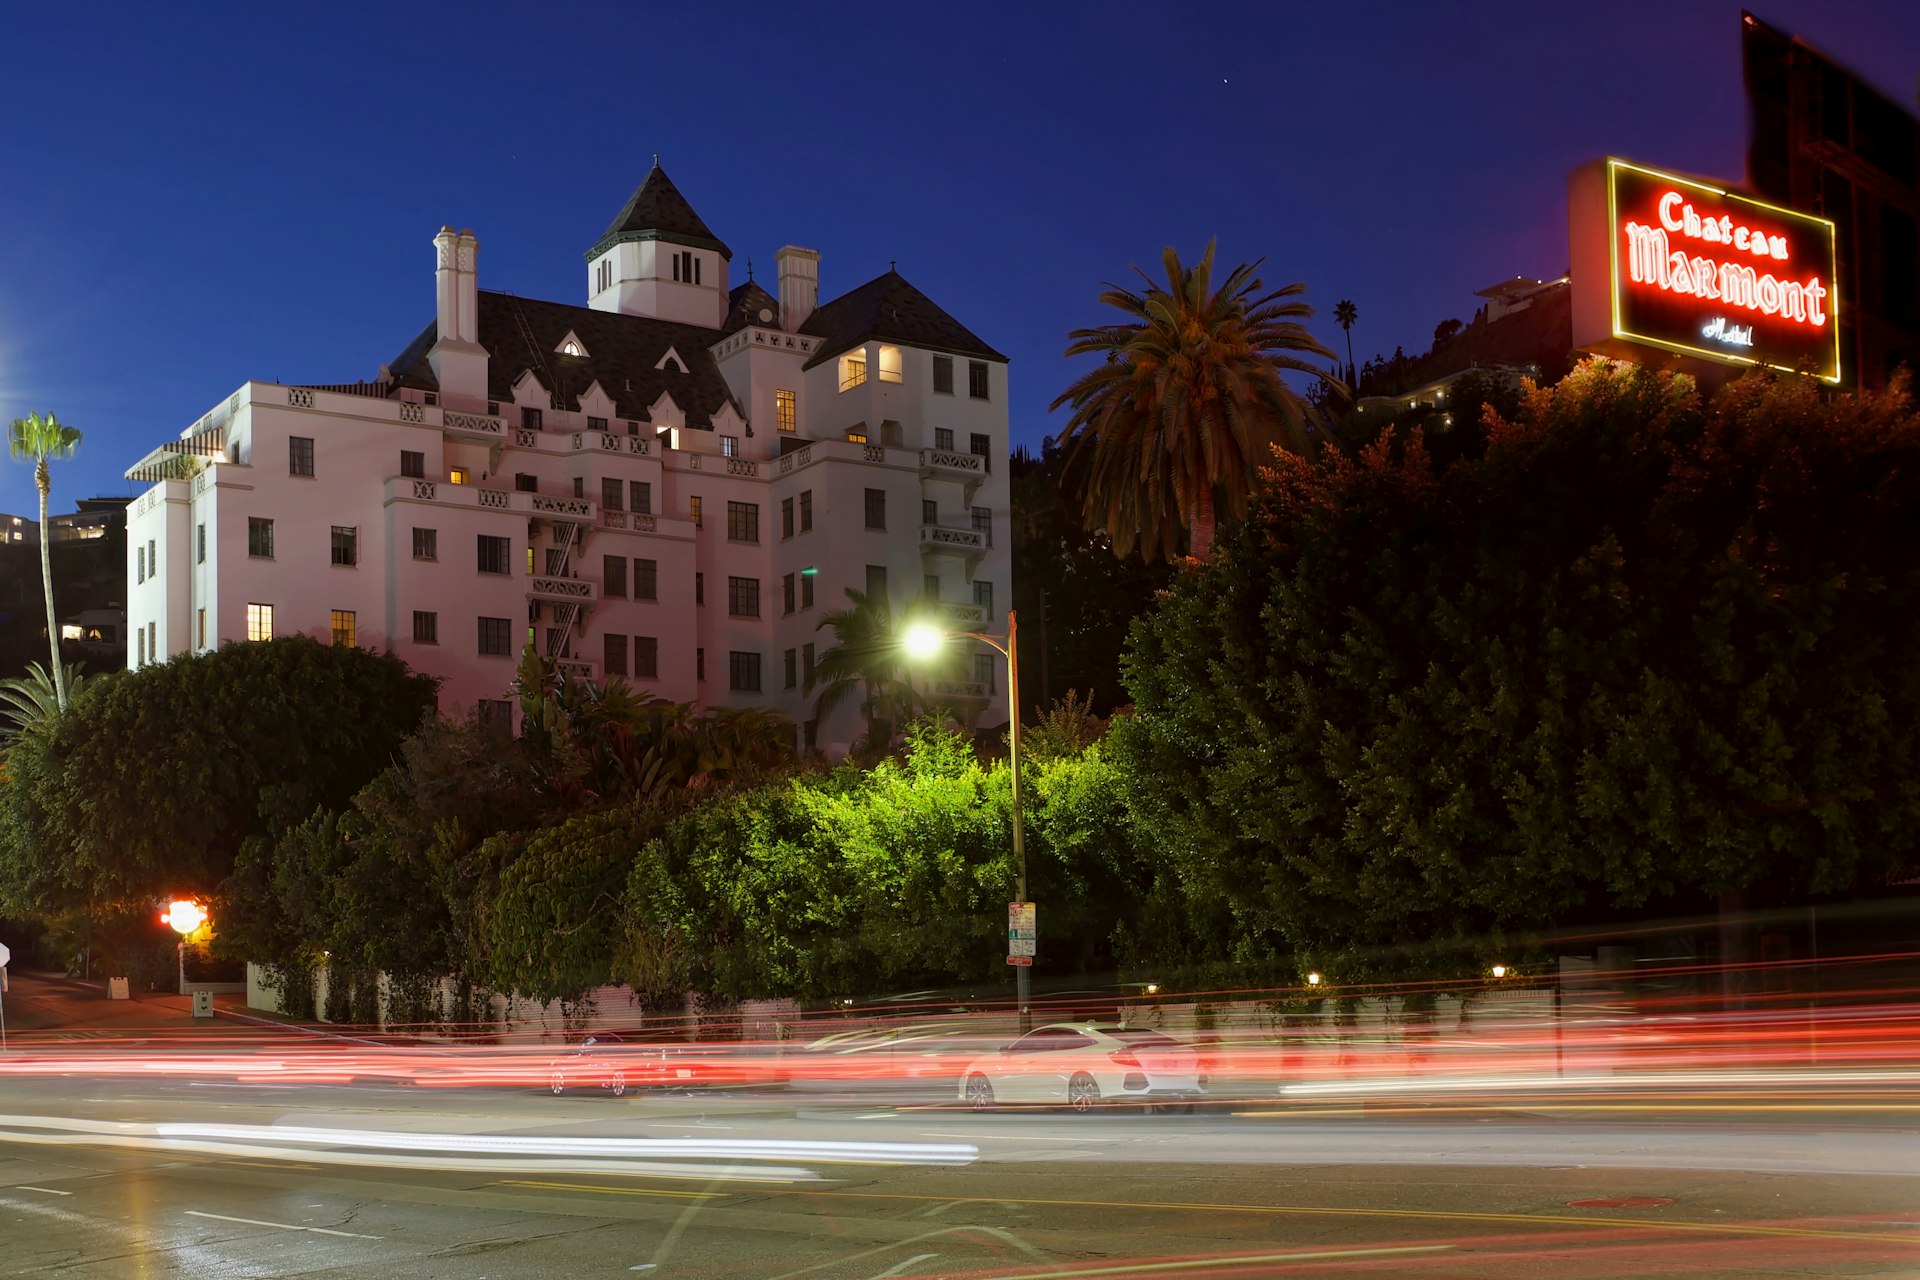 The exterior of Chateau Marmont hotel with blurred cars passing by, Los Angeles, California, USA